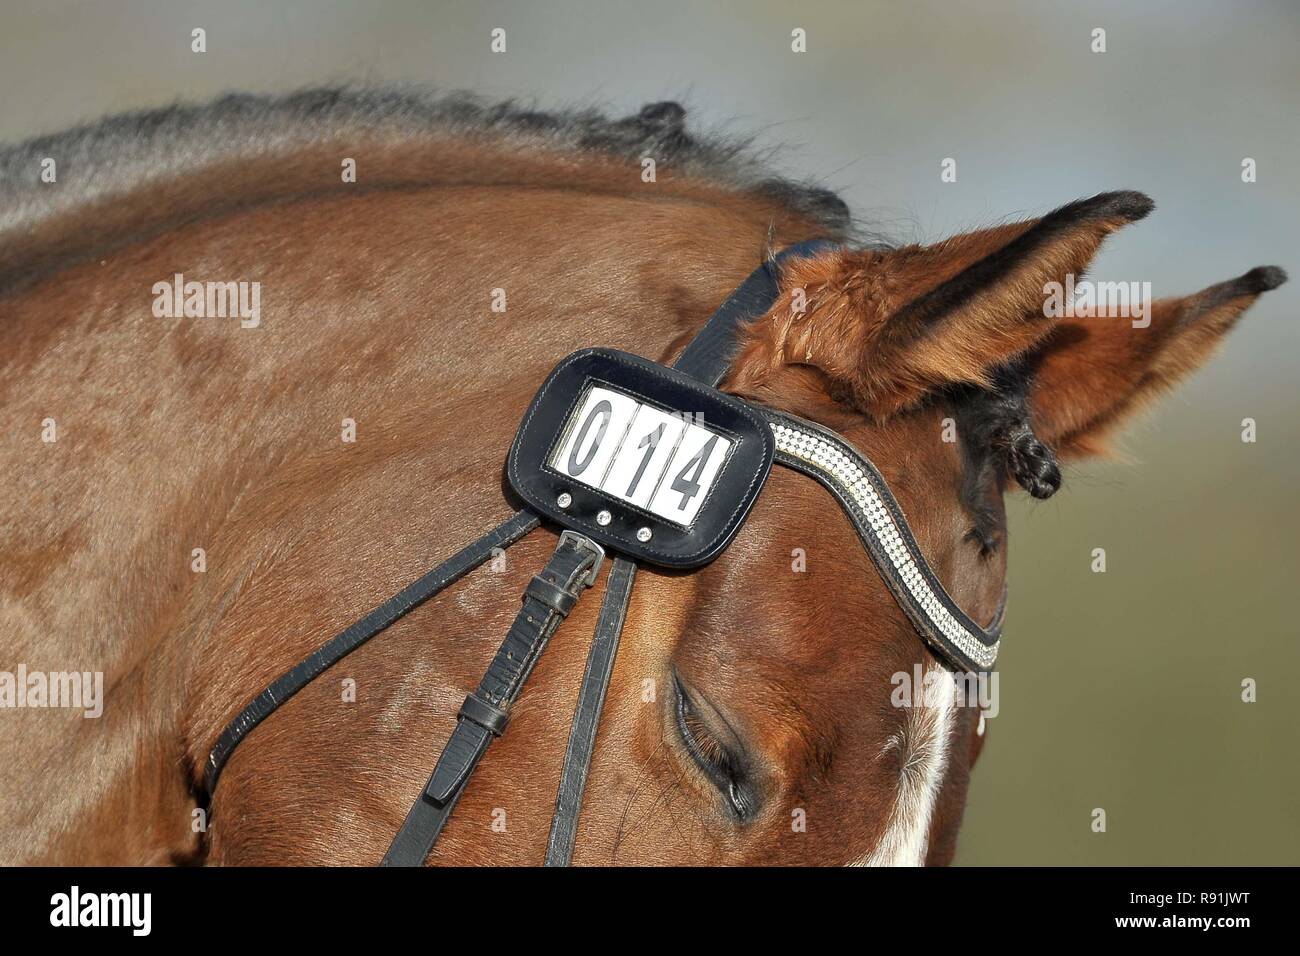 Chestnut dressage horse. pricked ears. bridle numbers, 14. Diamond looking brow band. Horse abstracts. 08/12/2018. Stock Photo